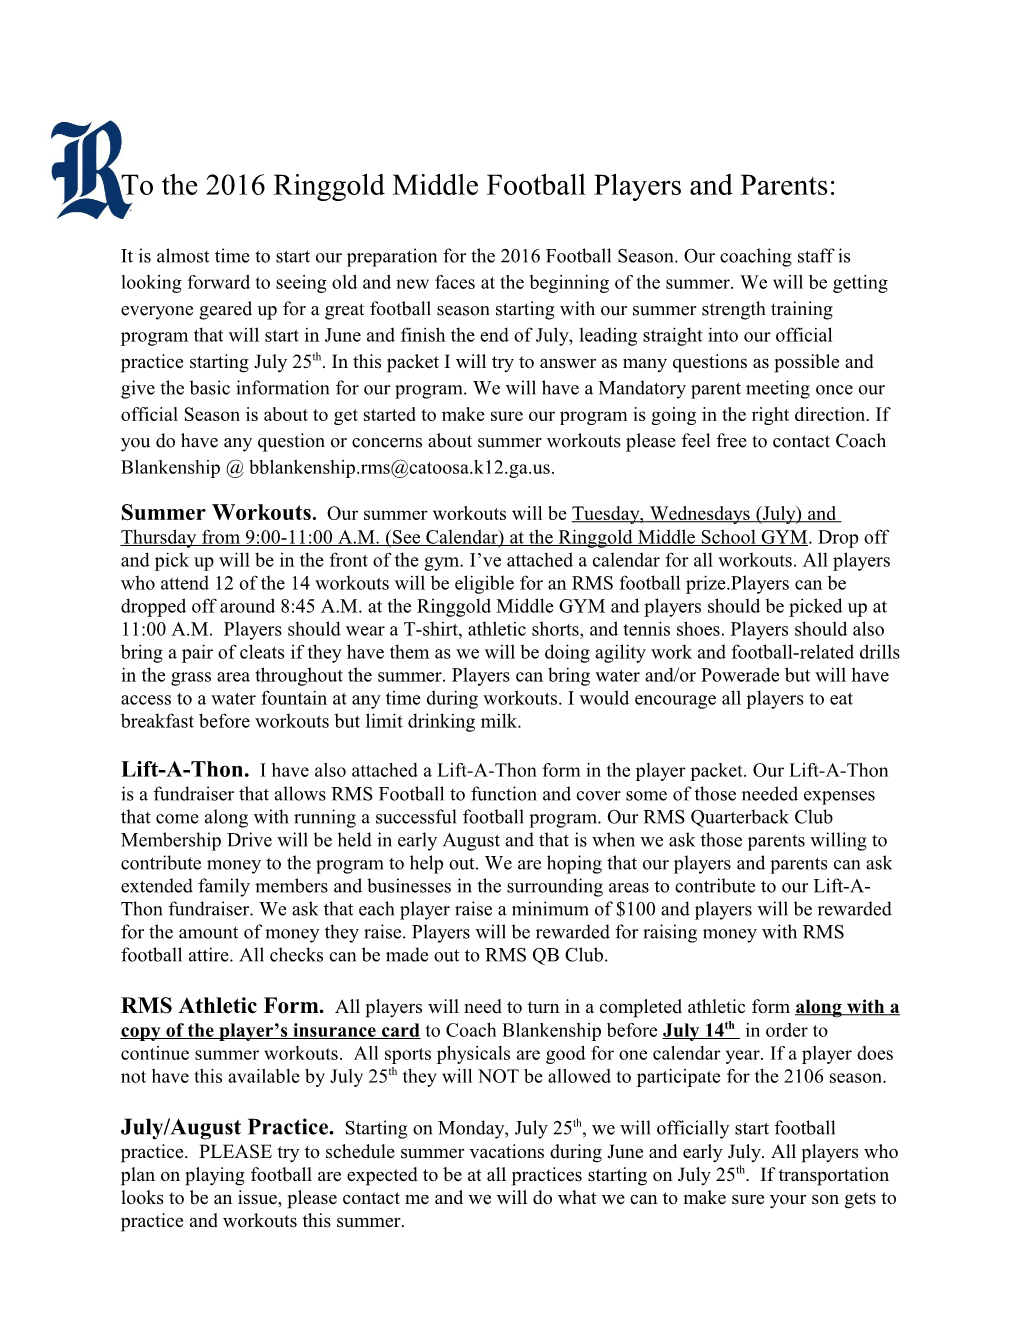 To the 2016 Ringgold Middle Football Players and Parents